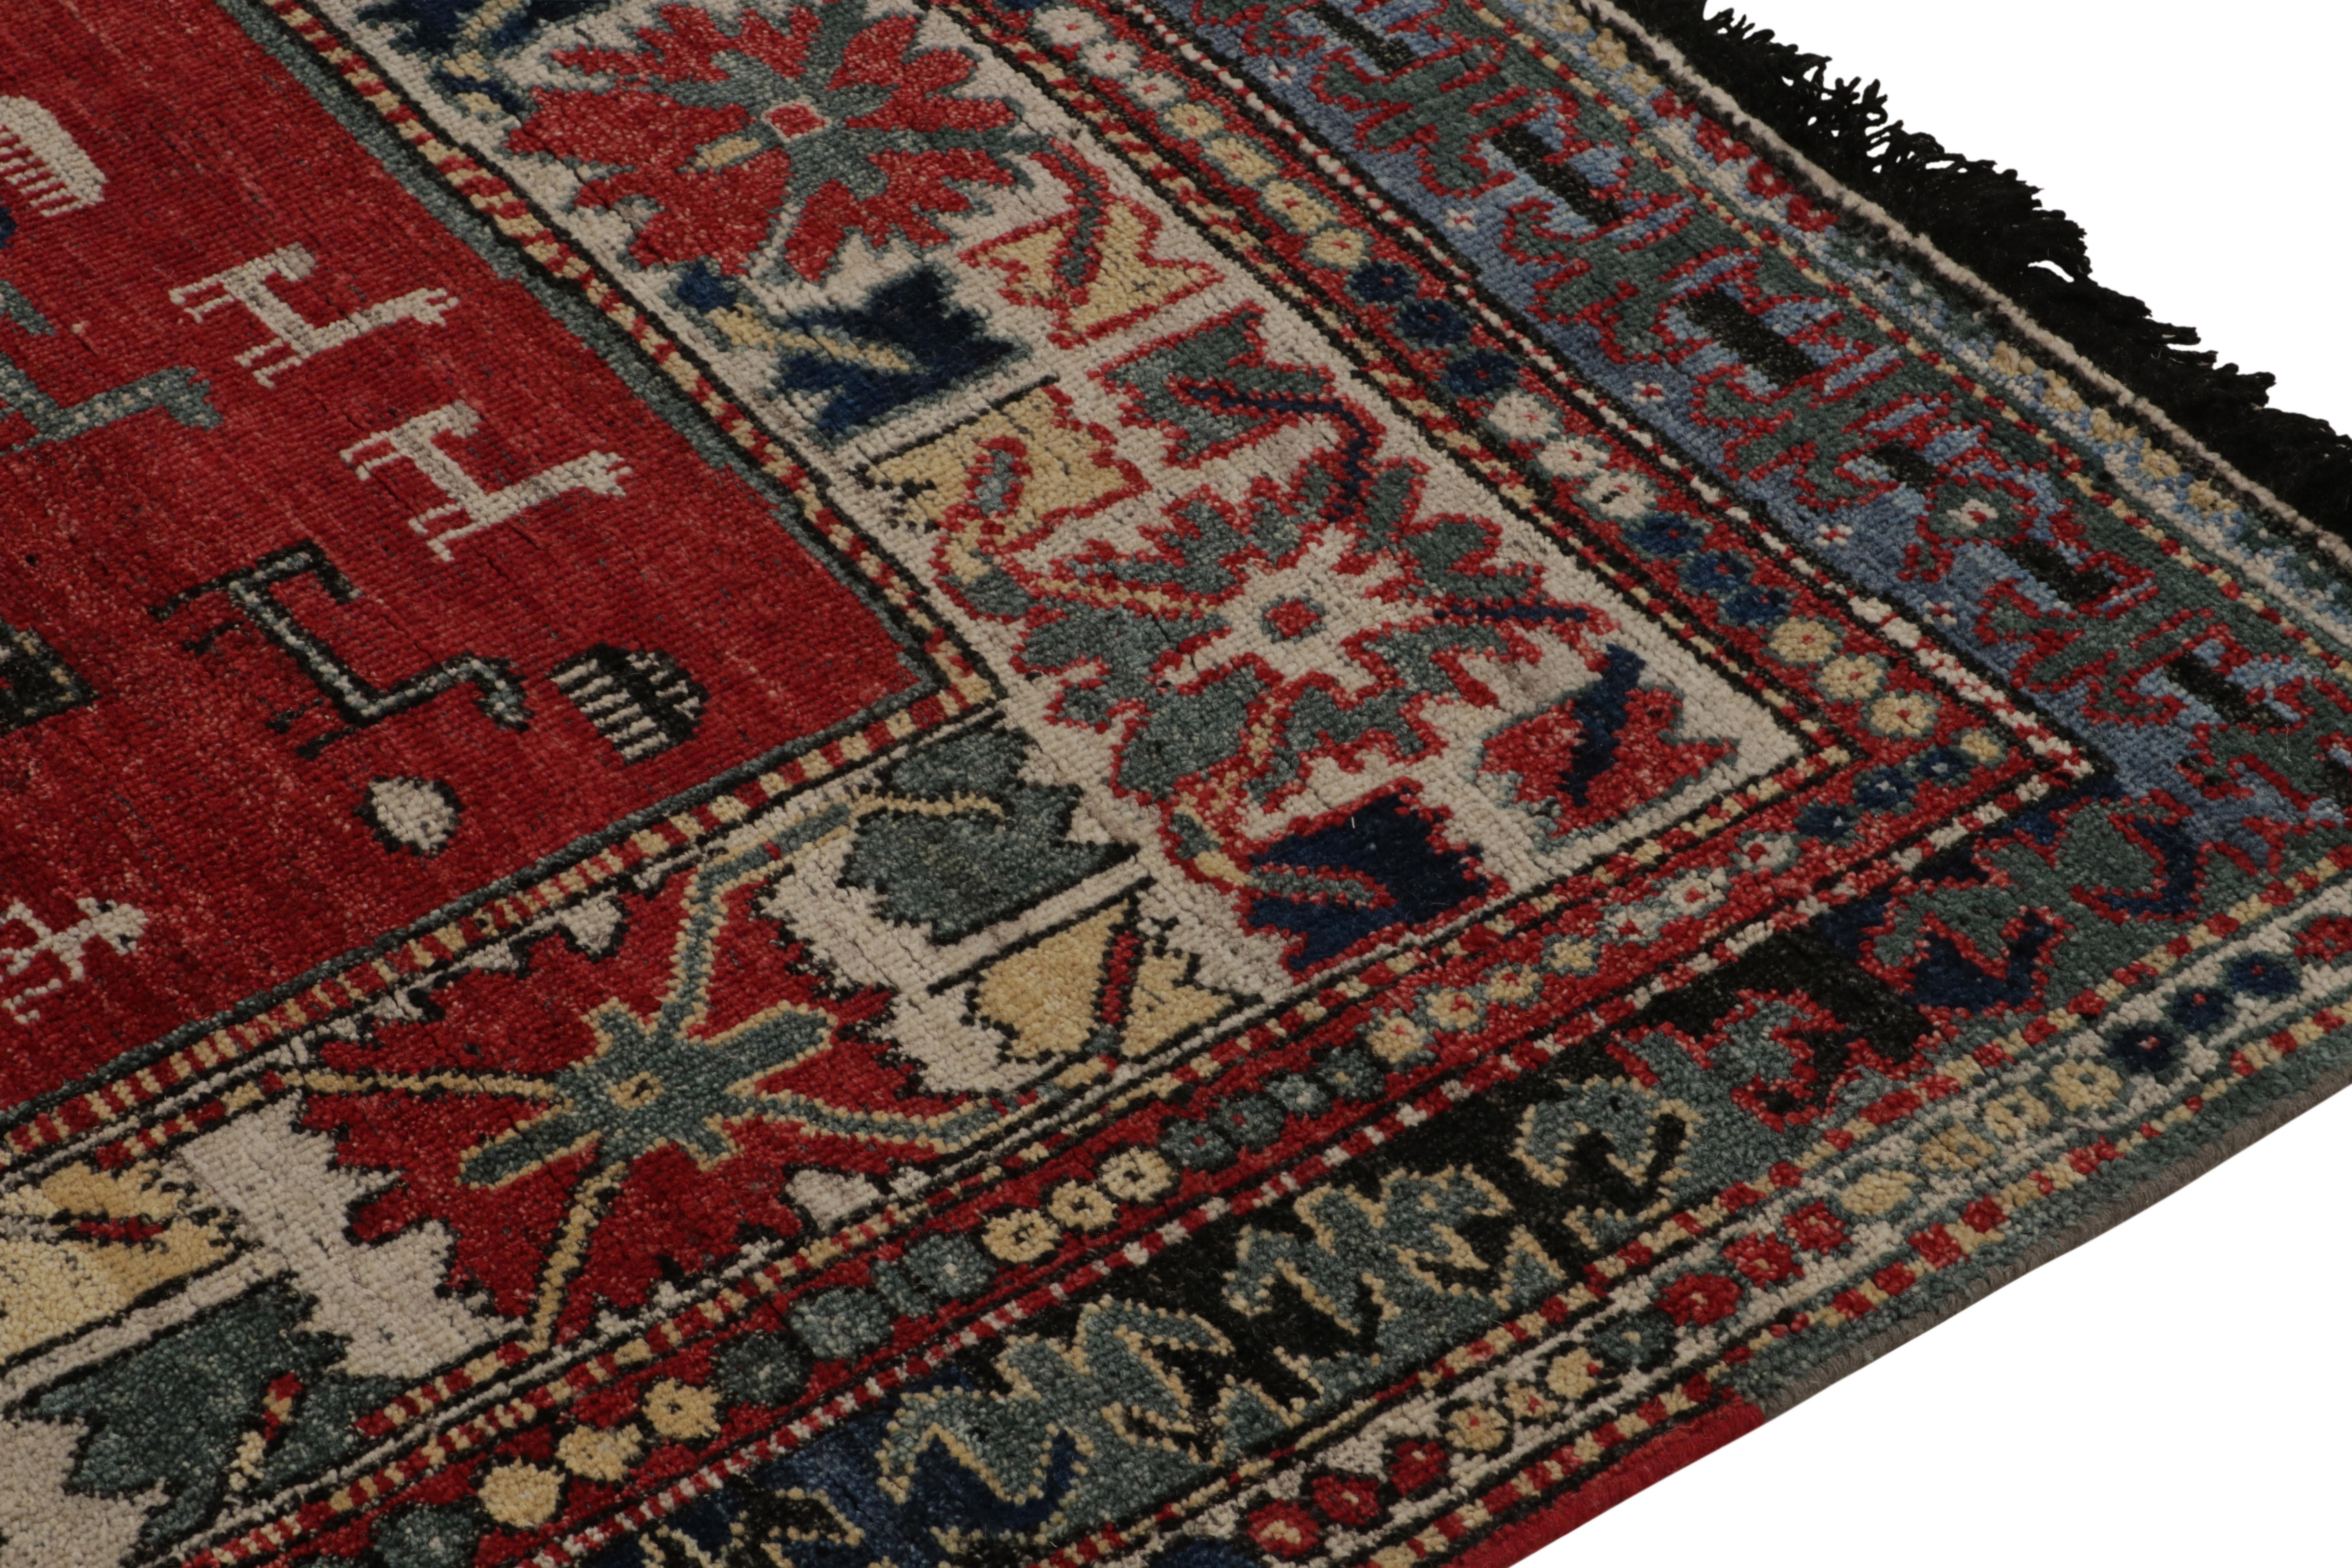 Rug & Kilim’s Antique Turkmen Style Rug in Red with Blue & Gold Tribal Patterns In New Condition For Sale In Long Island City, NY